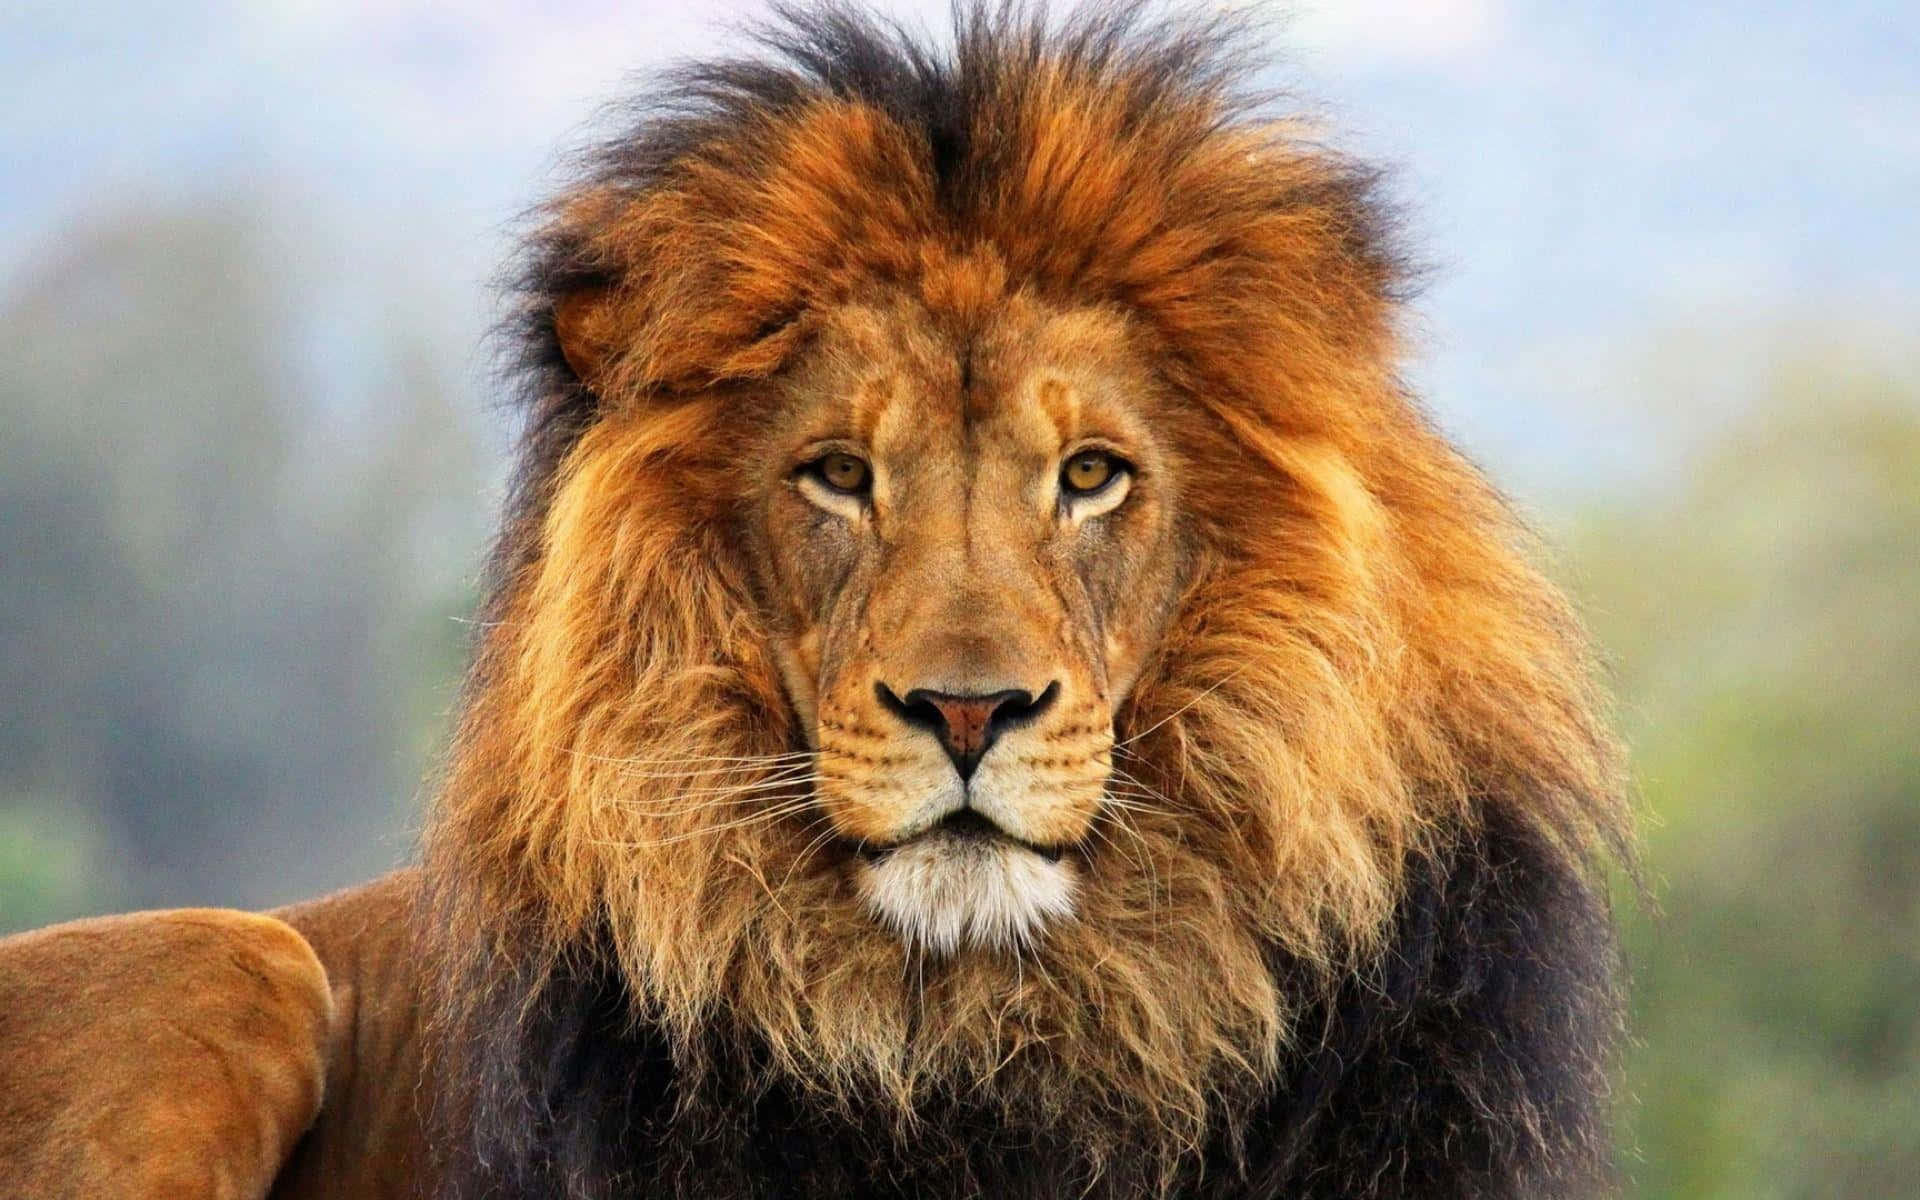 The Majestic Lion - King of the Savannah